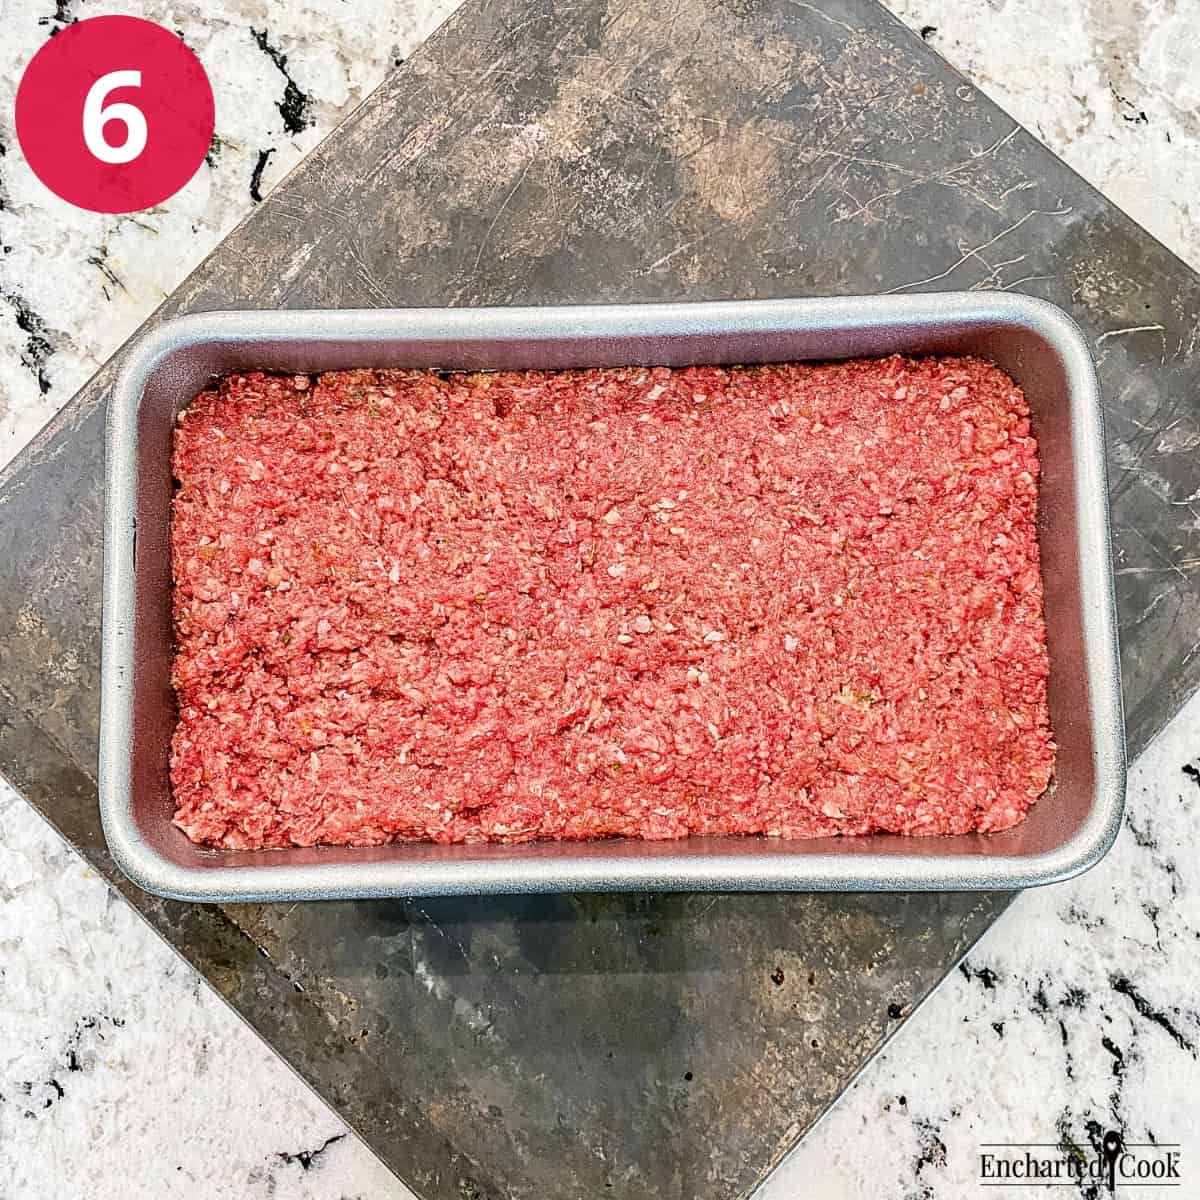 Process Photo 6 - The meatloaf mixture is pressed into a large loaf pan.